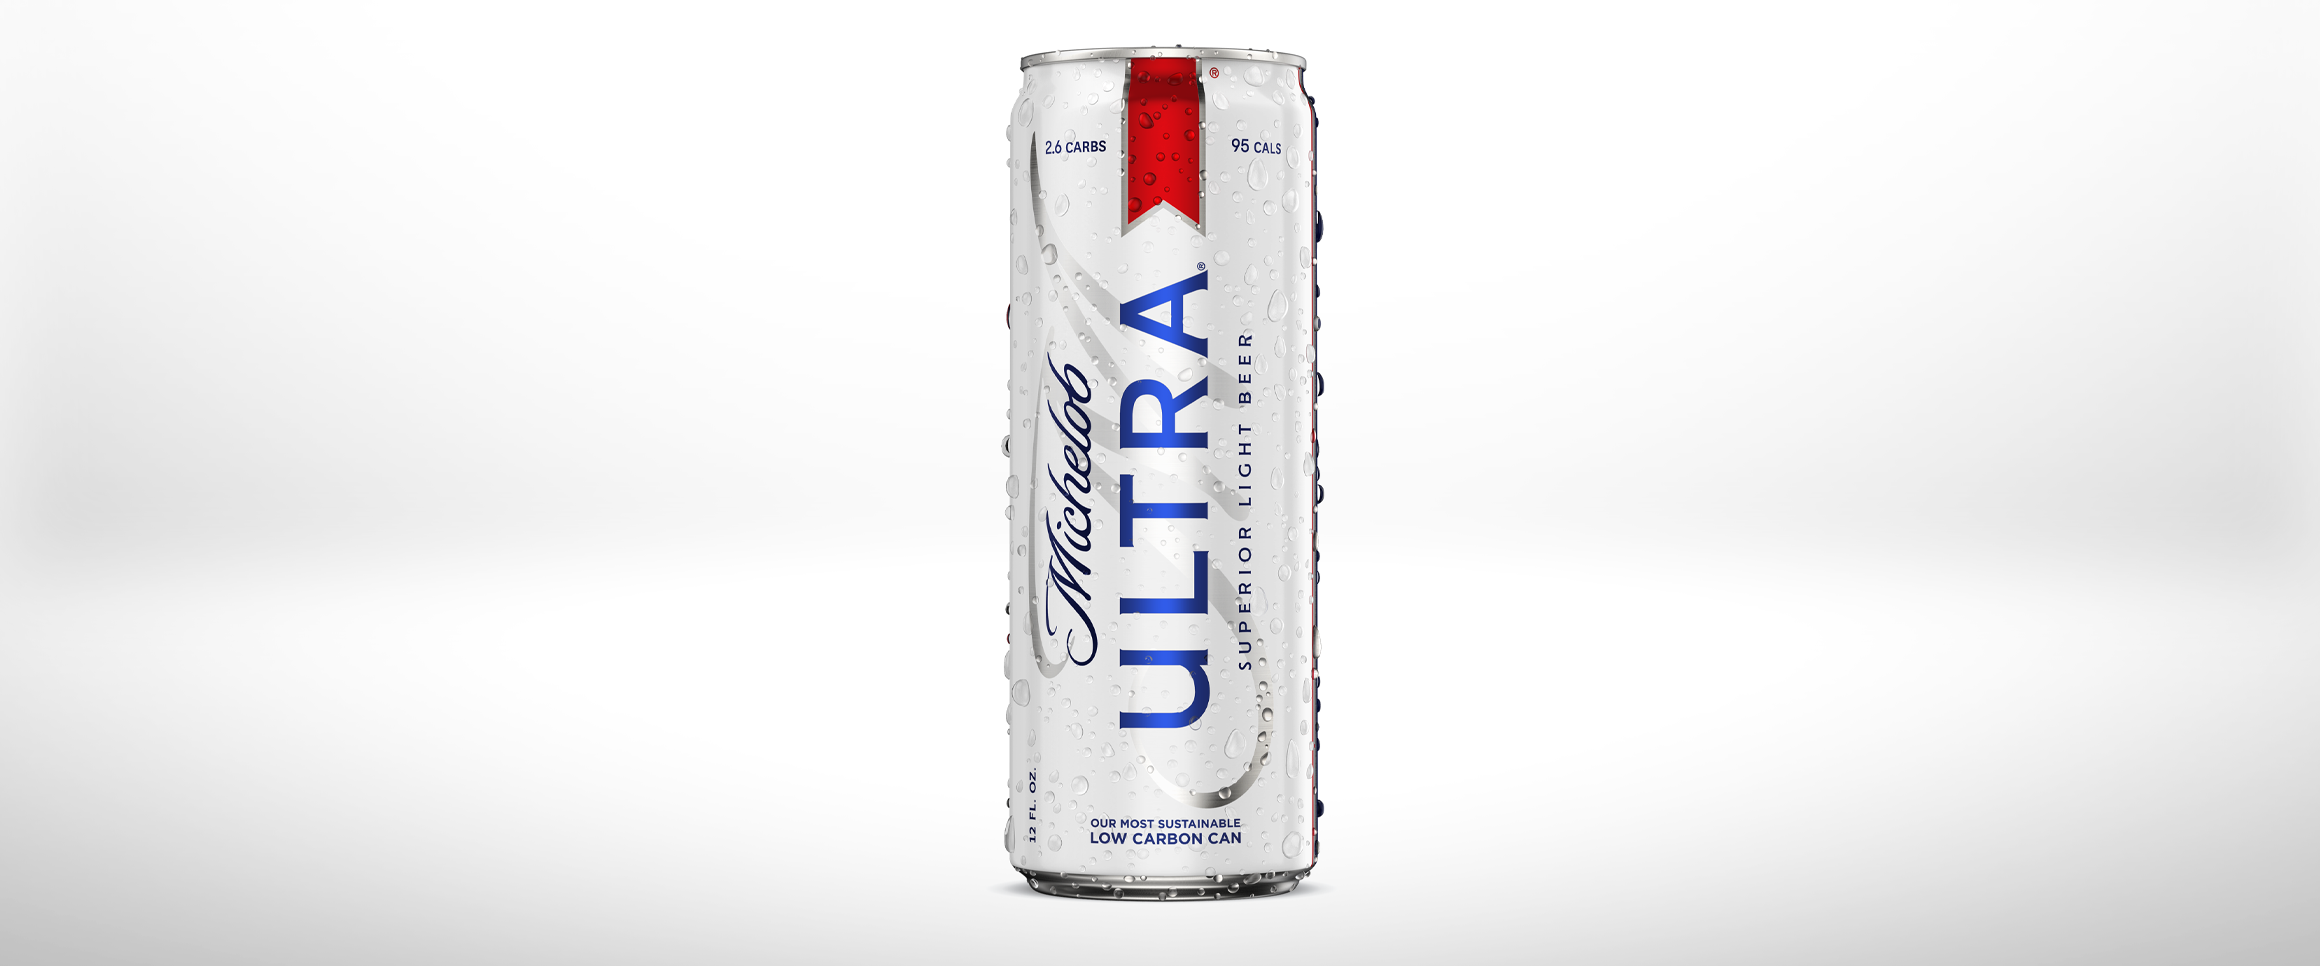 Anheuser-Busch Announces Partnership to Develop a More Sustainable Beer Can